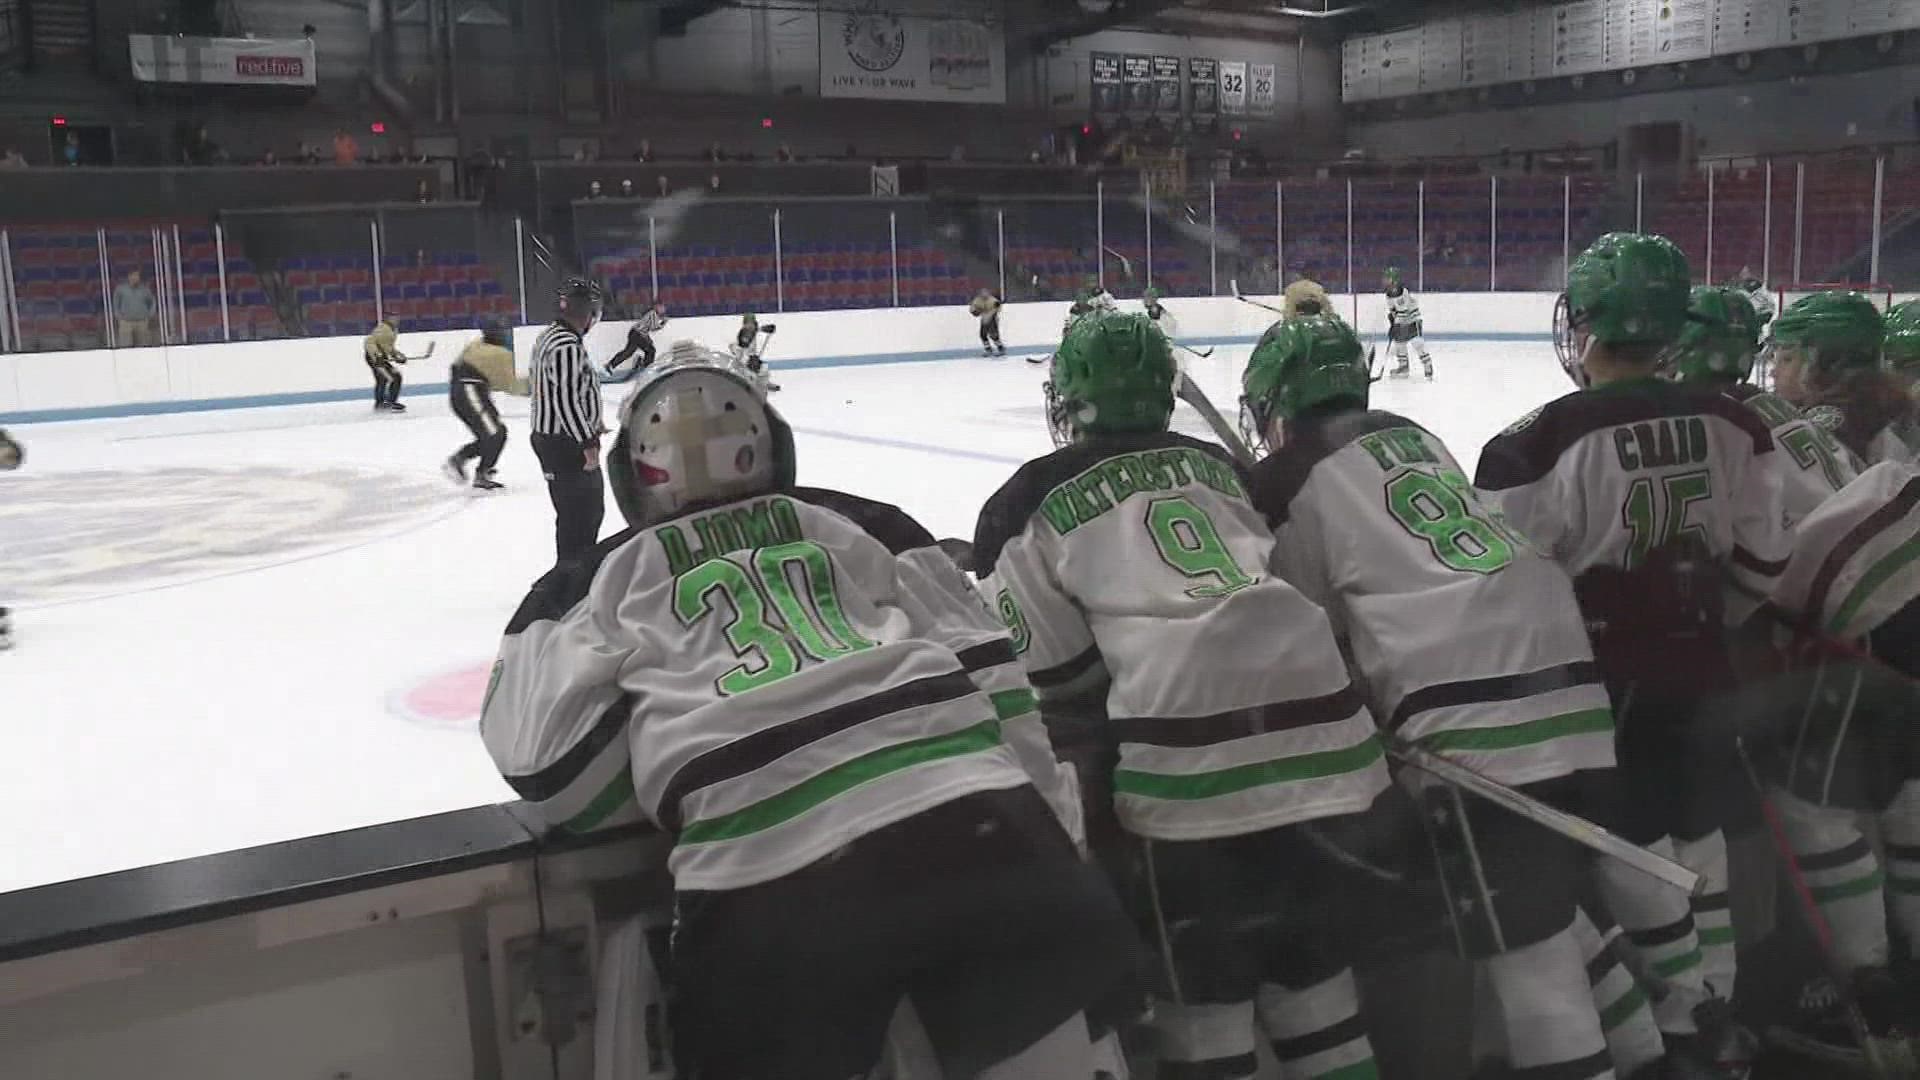 The city is welcoming some of the state's top hockey teams to town for a hockey tournament.